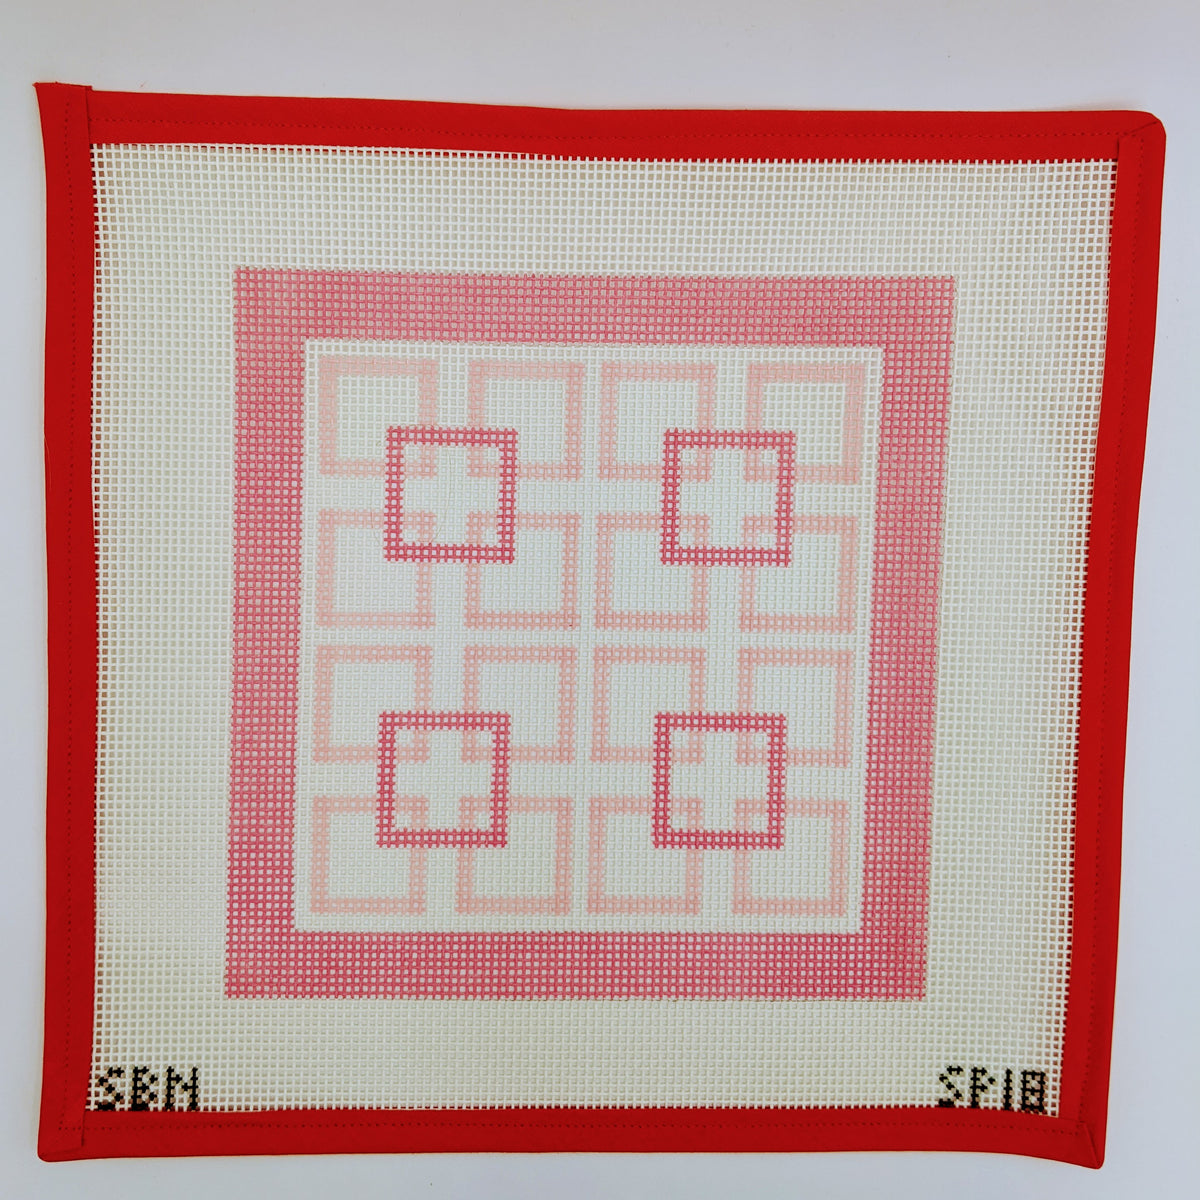 Shell Pink Squares within Squares (on 10 mesh)